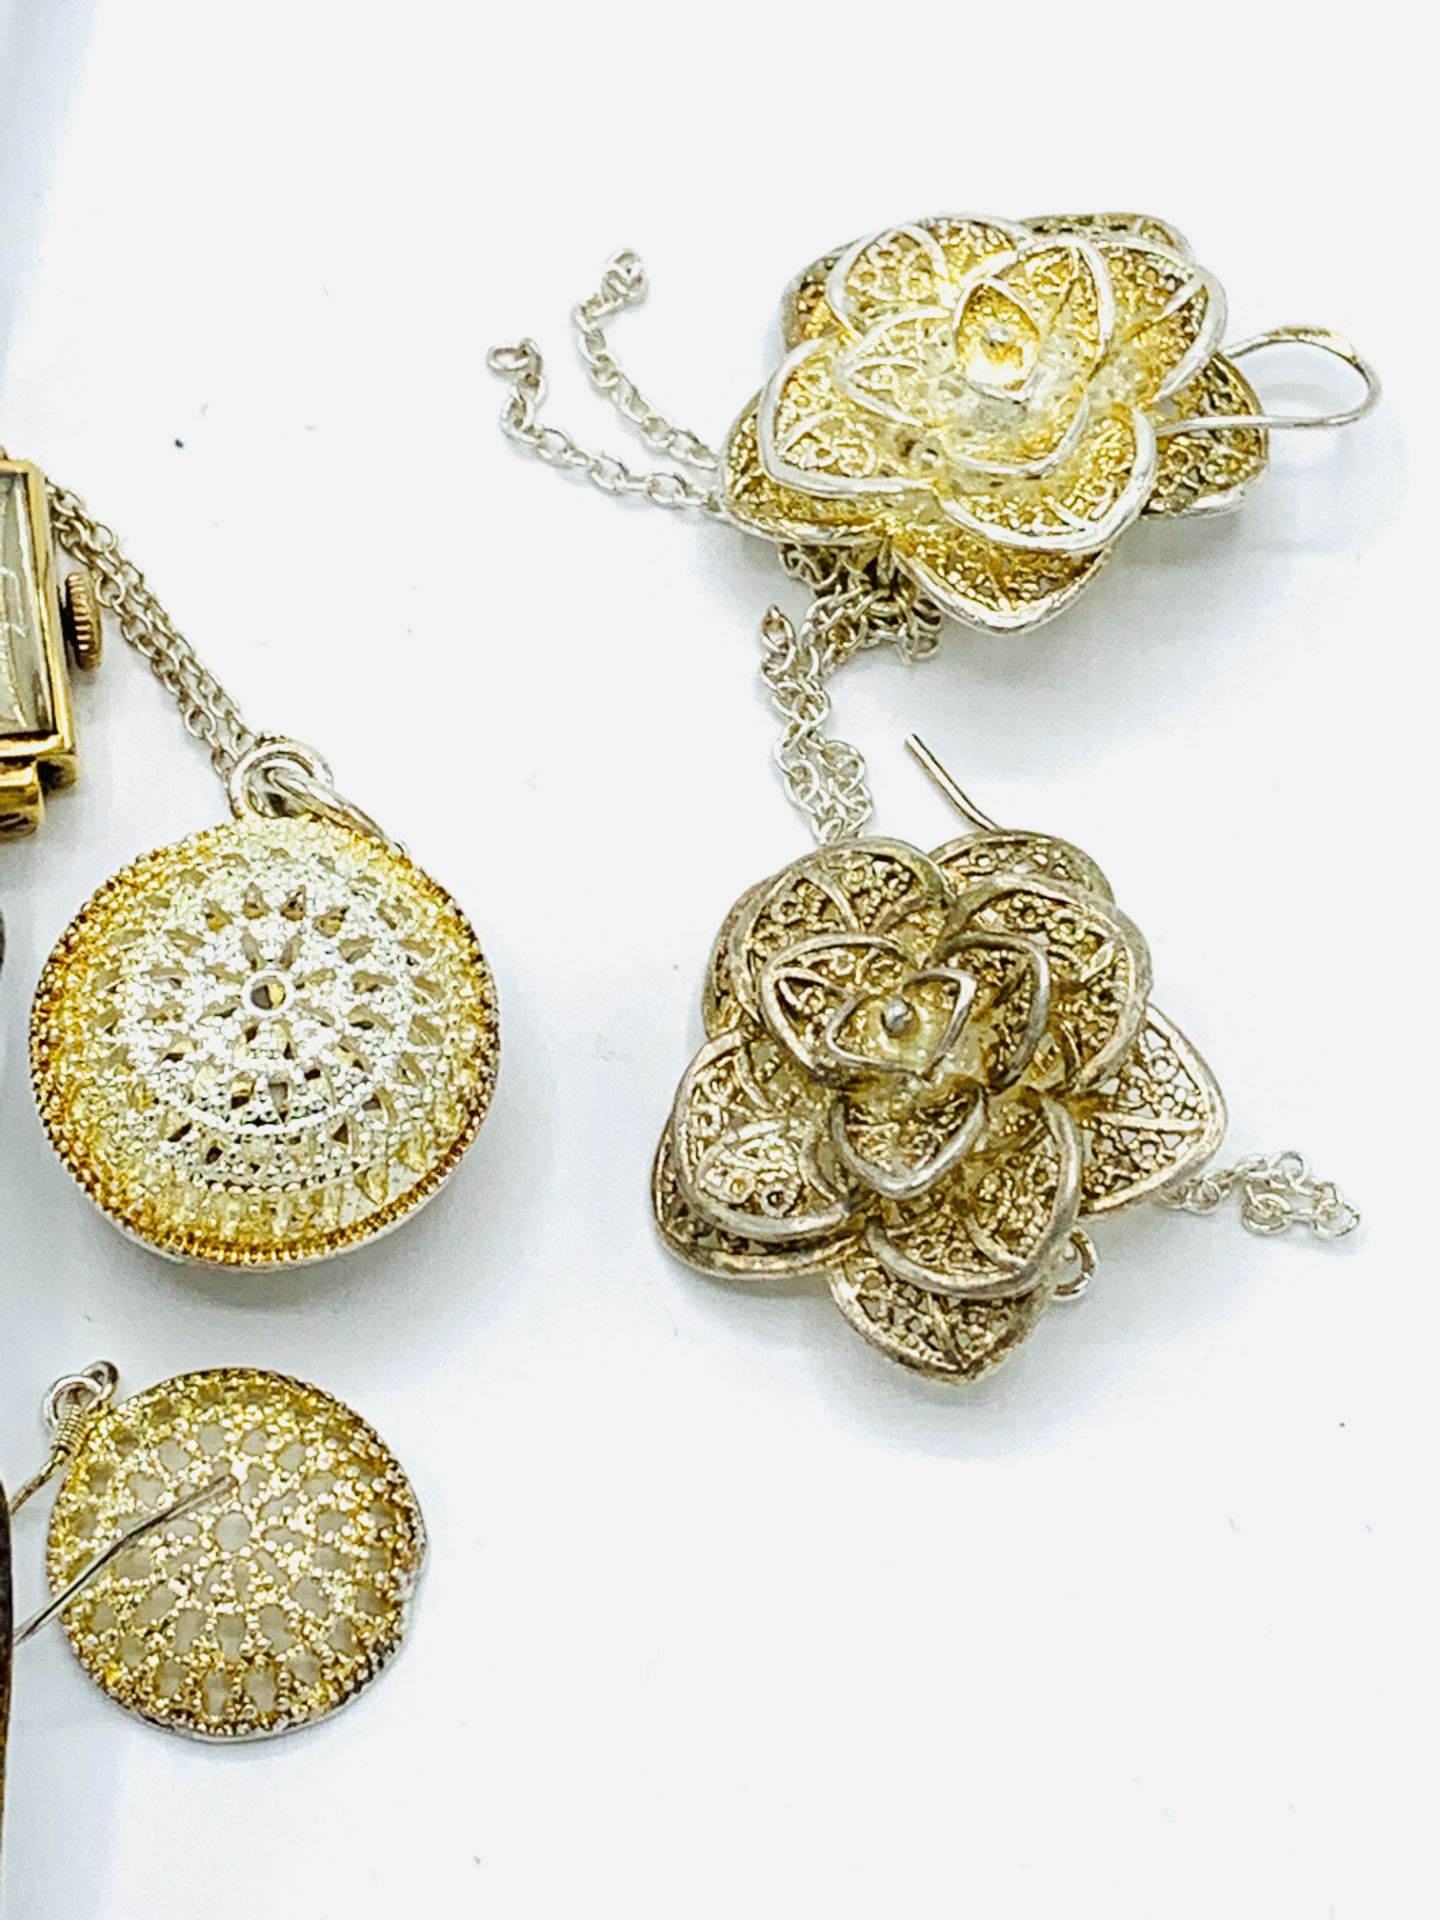 2 hallmarked silver earrings, gold plate case cocktail watch; circular pendant on 925 silver chain - Image 5 of 5